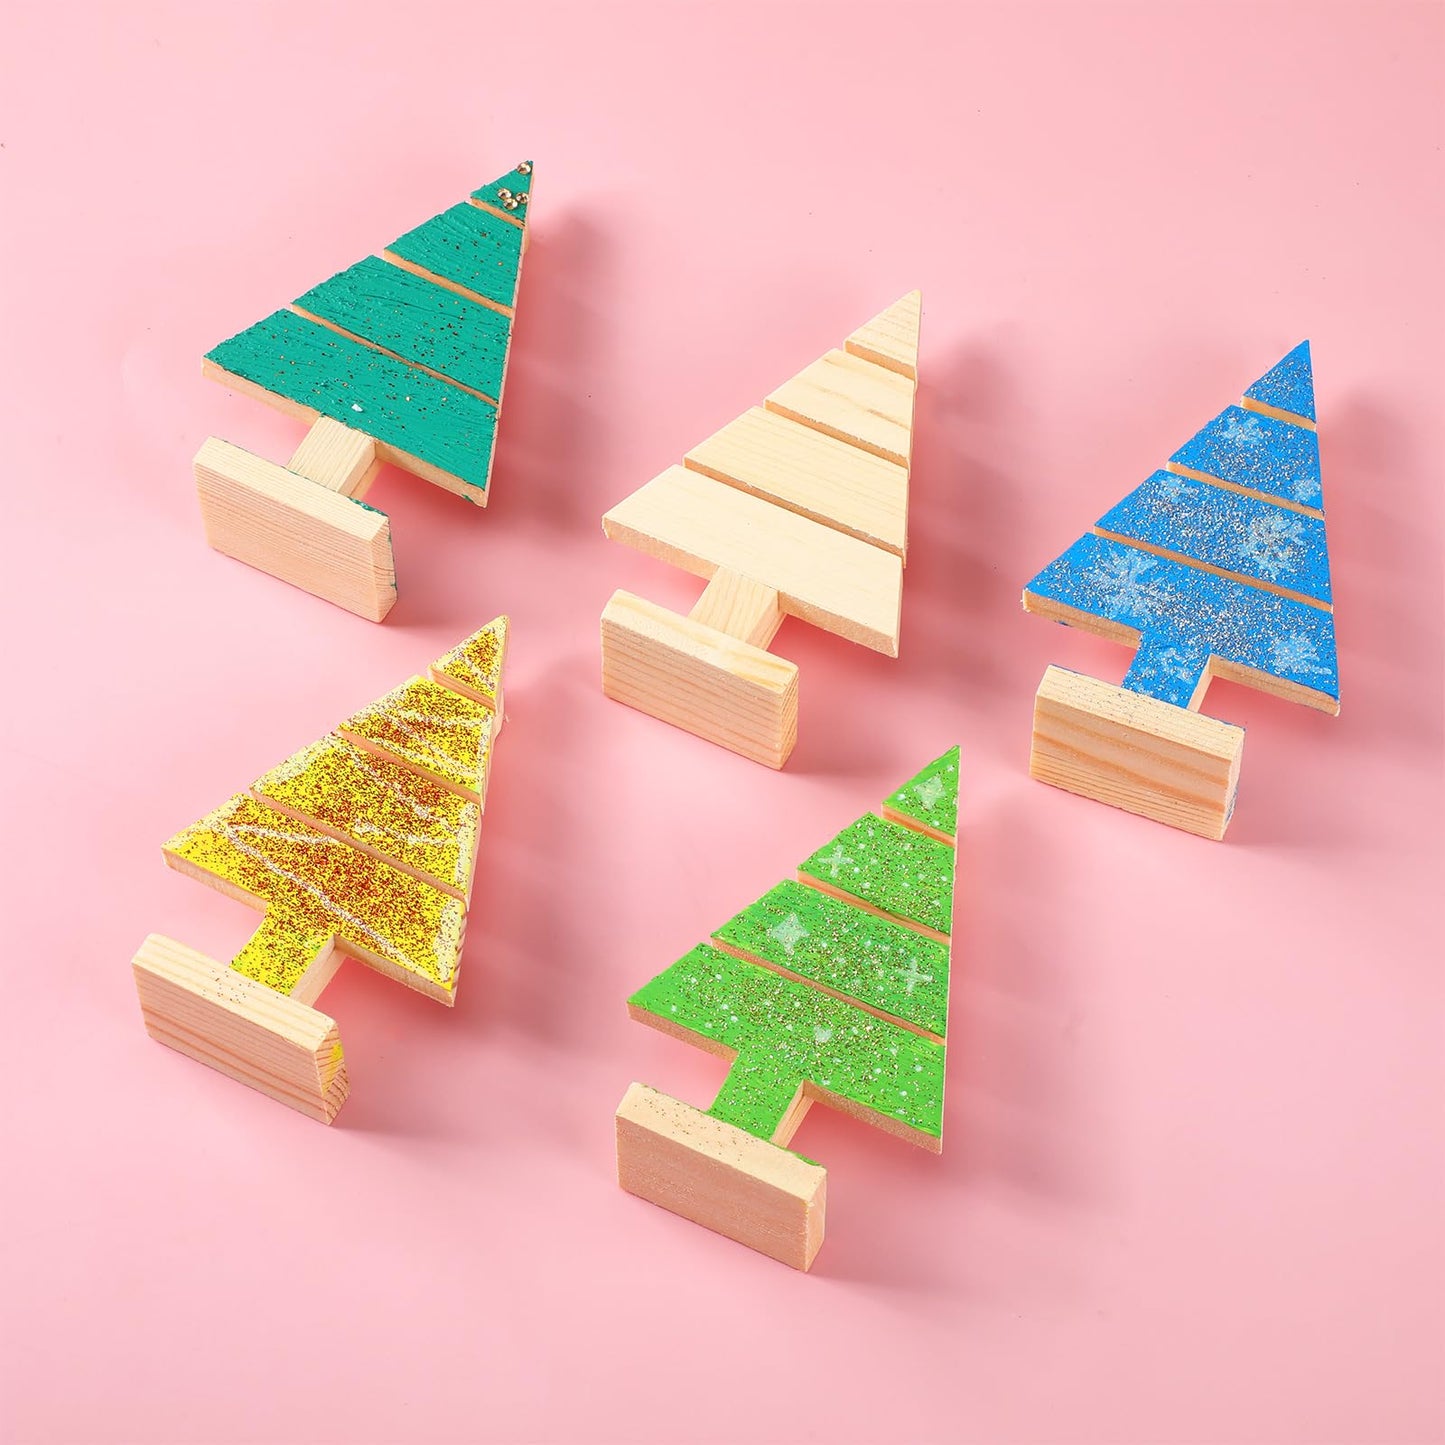 Geetery 6 Pcs Christmas Standing Wood Pallet Christmas Tree Unfinished Blank Wooden Christmas Tree Miniature Decorative Wood Trees for Crafting